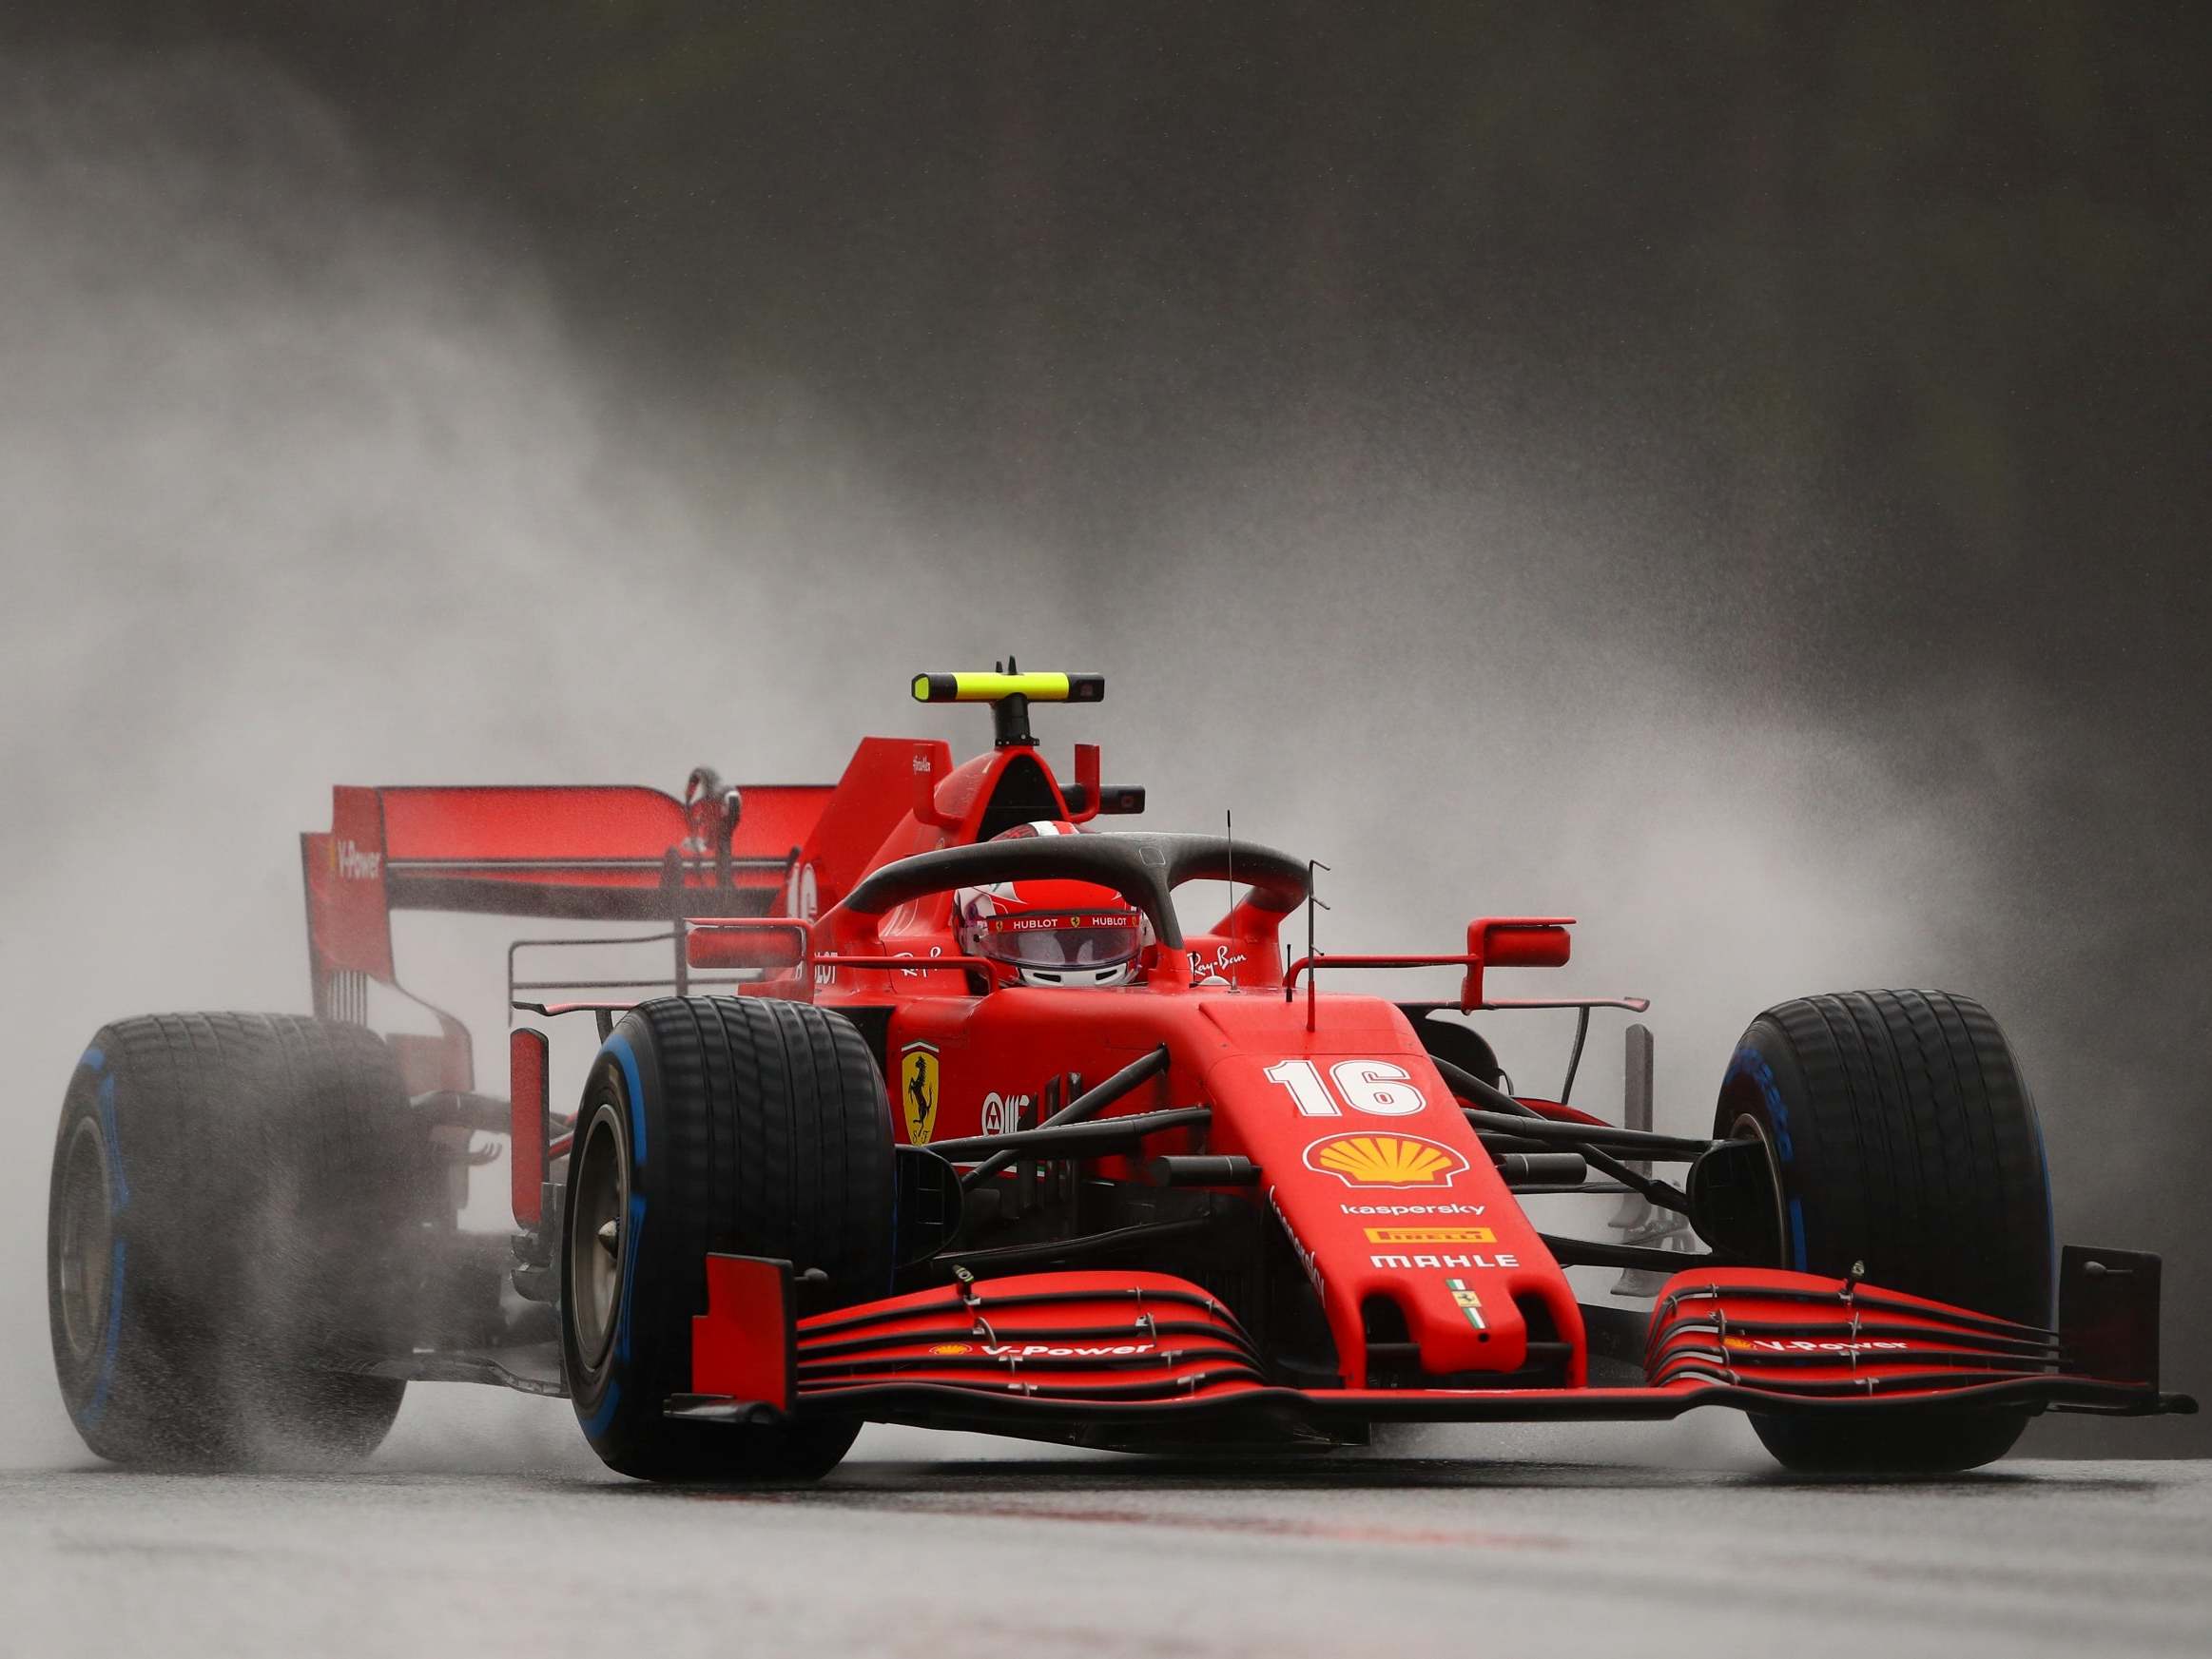 Styrian Grand Prix: Charles Leclerc handed three-place penalty following qualifying to add to Ferrari woes